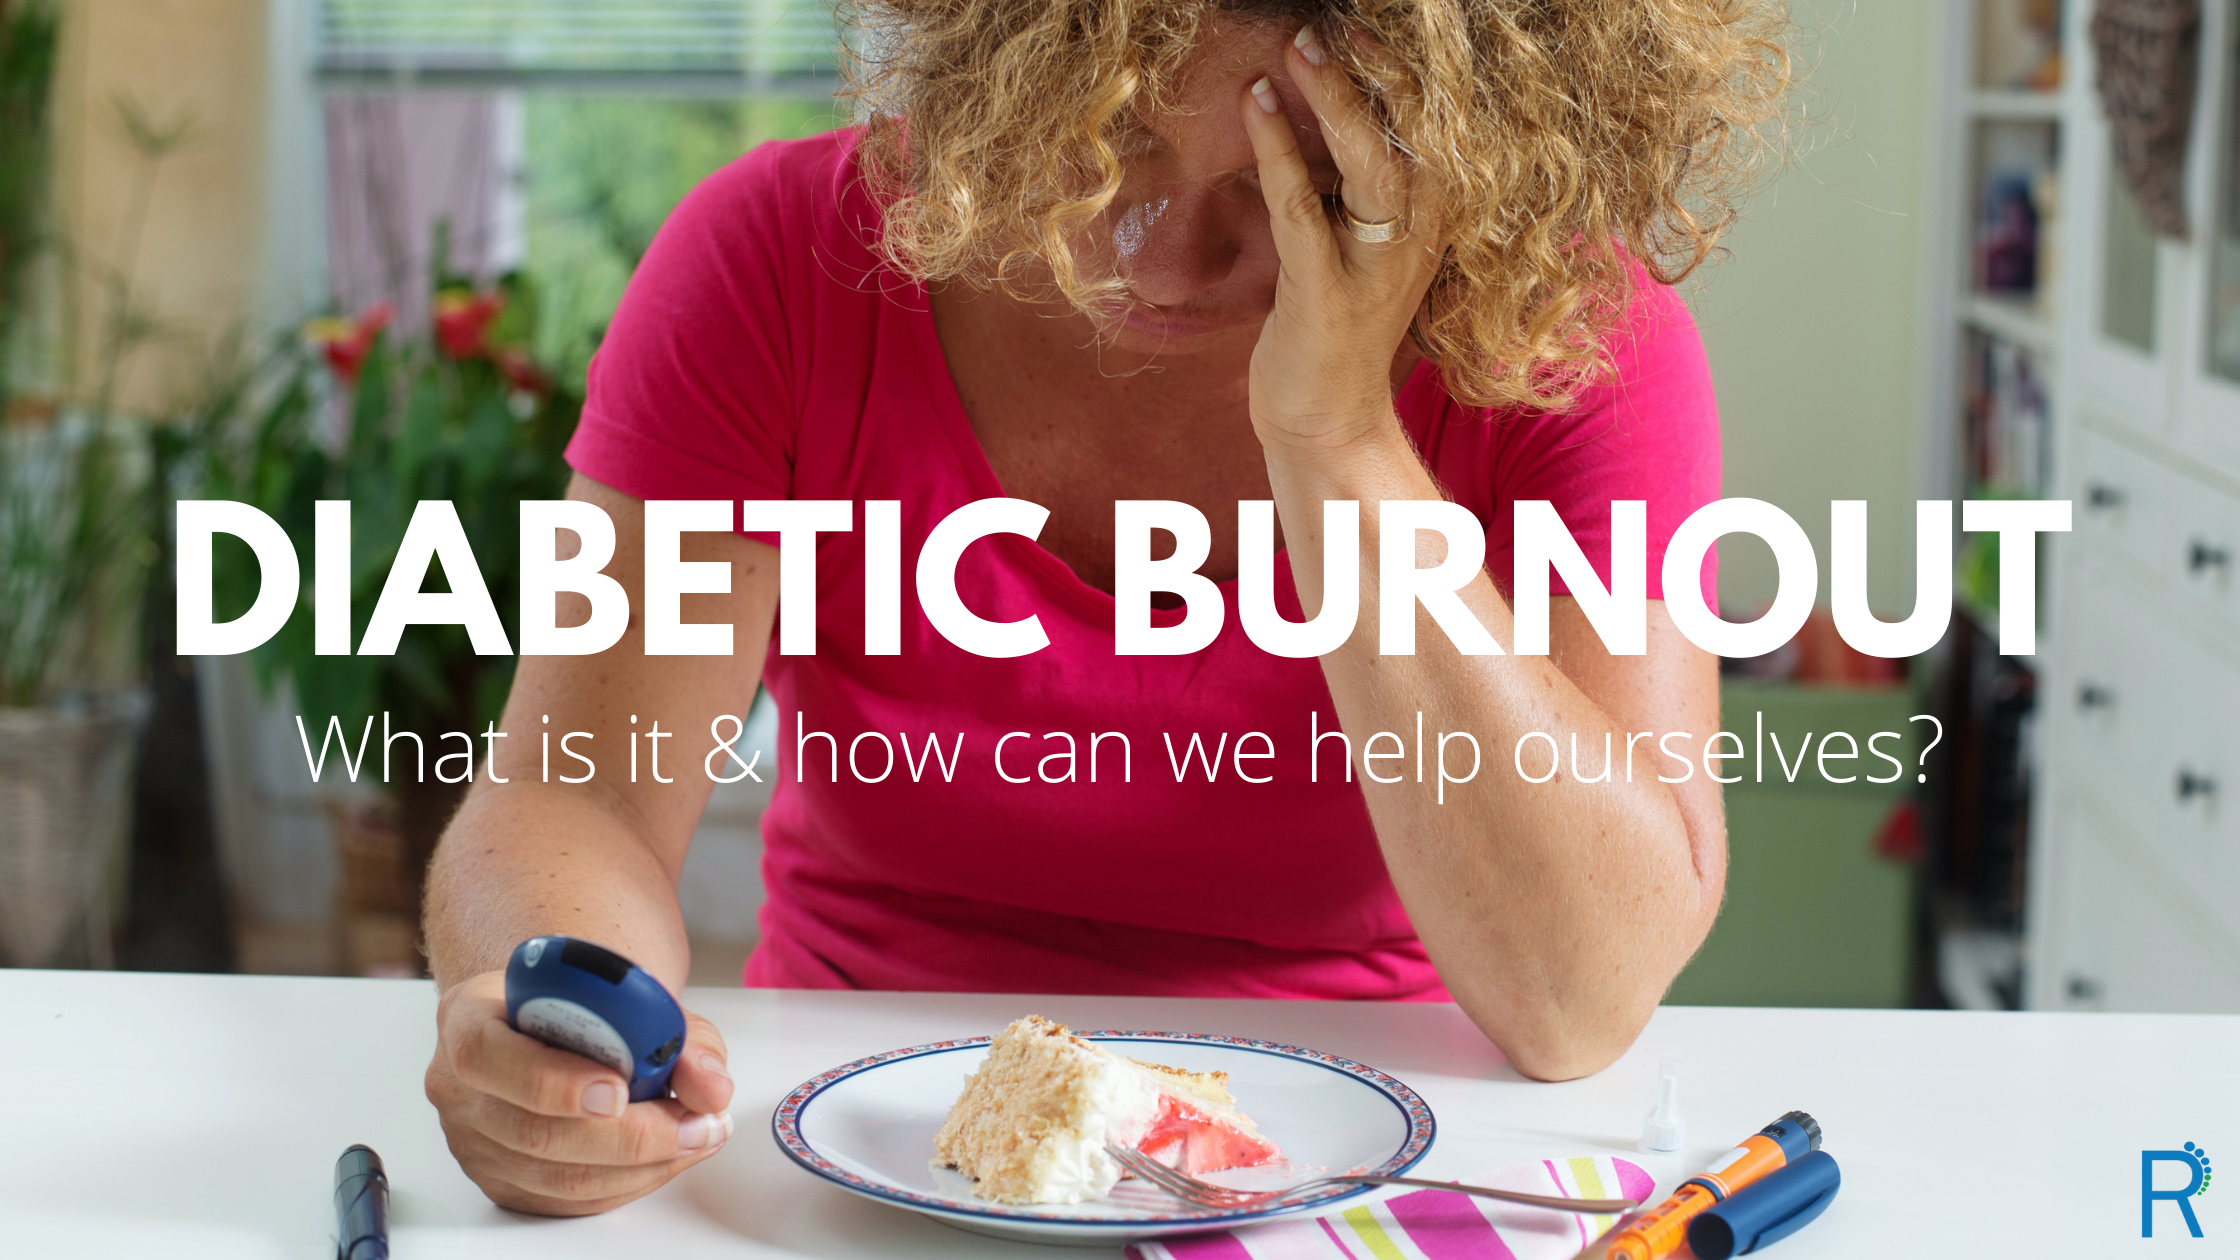 Diabetic Burnout: What is it & how can we help ourselves?